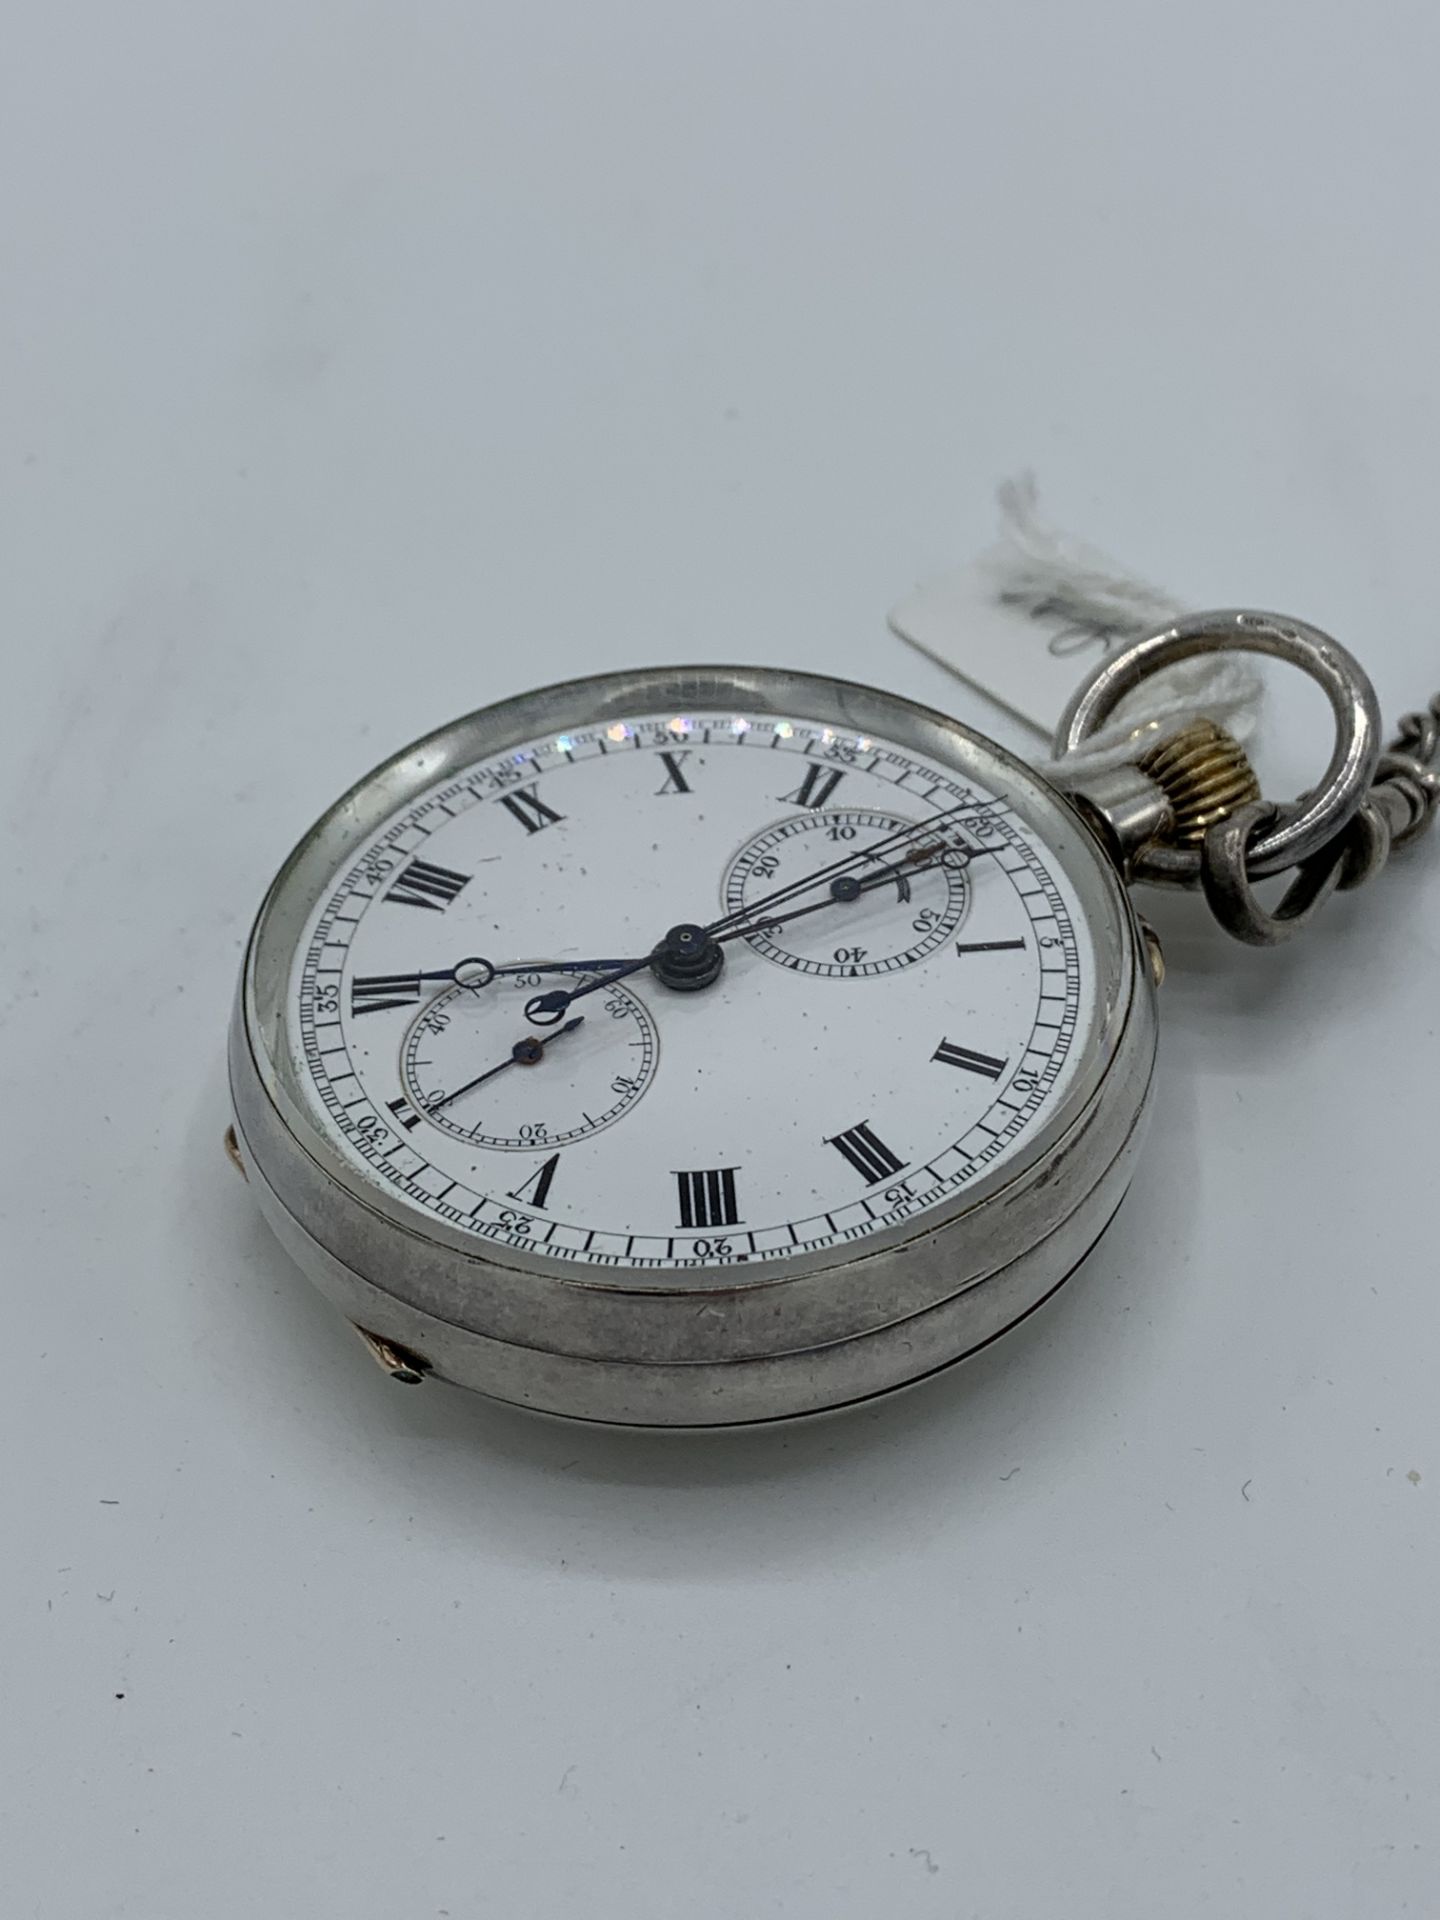 935 silver cased pocket watch complete with silver hallmarked watch chain, seconds and stop watch - Image 3 of 5